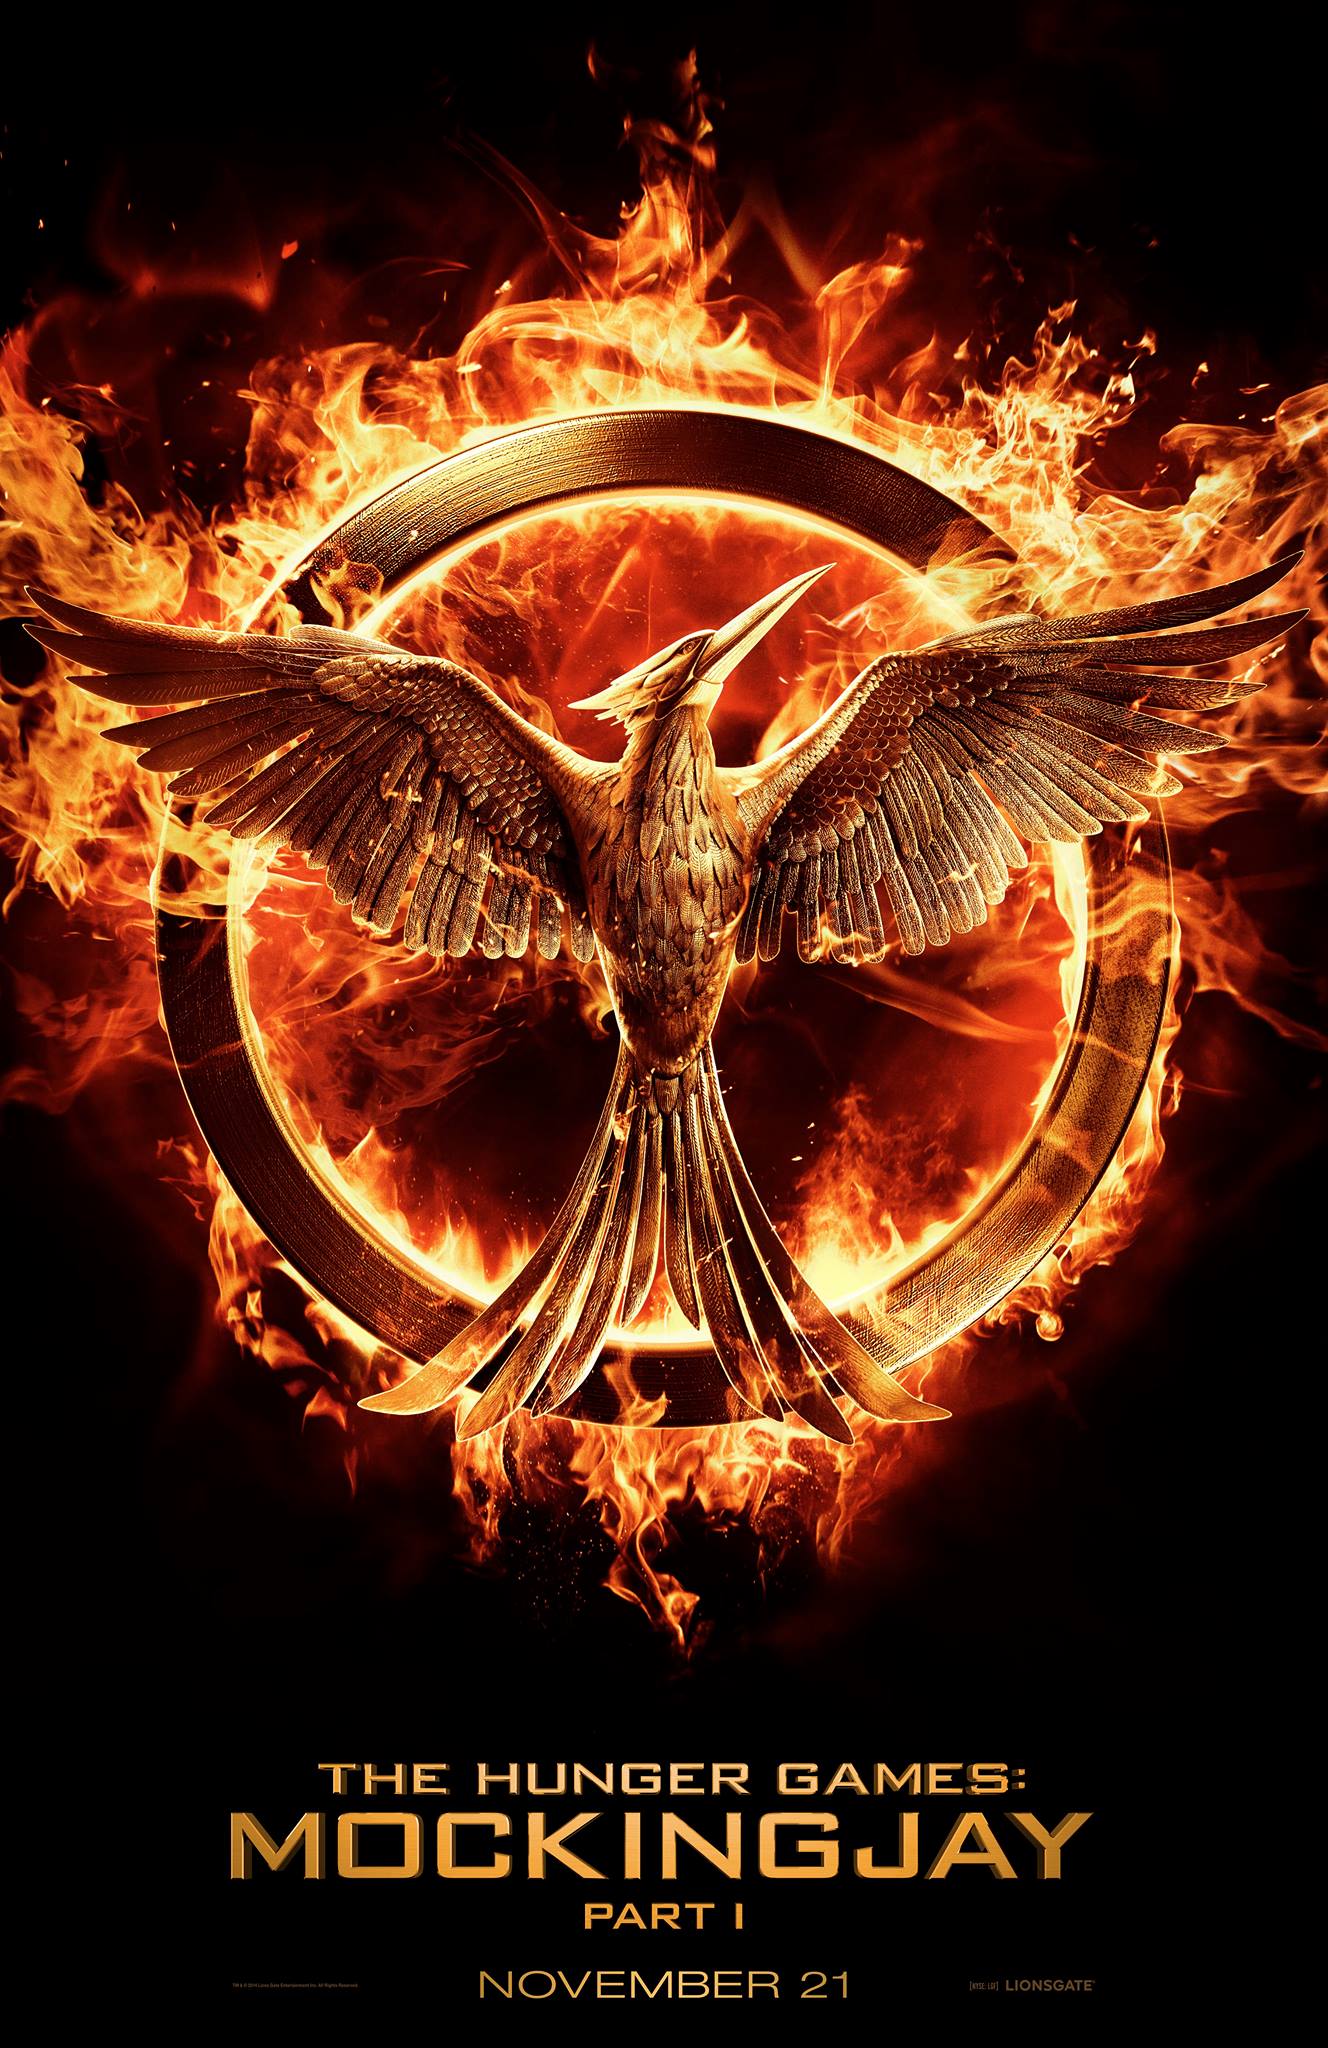 The hunger games mockingjay Part 1